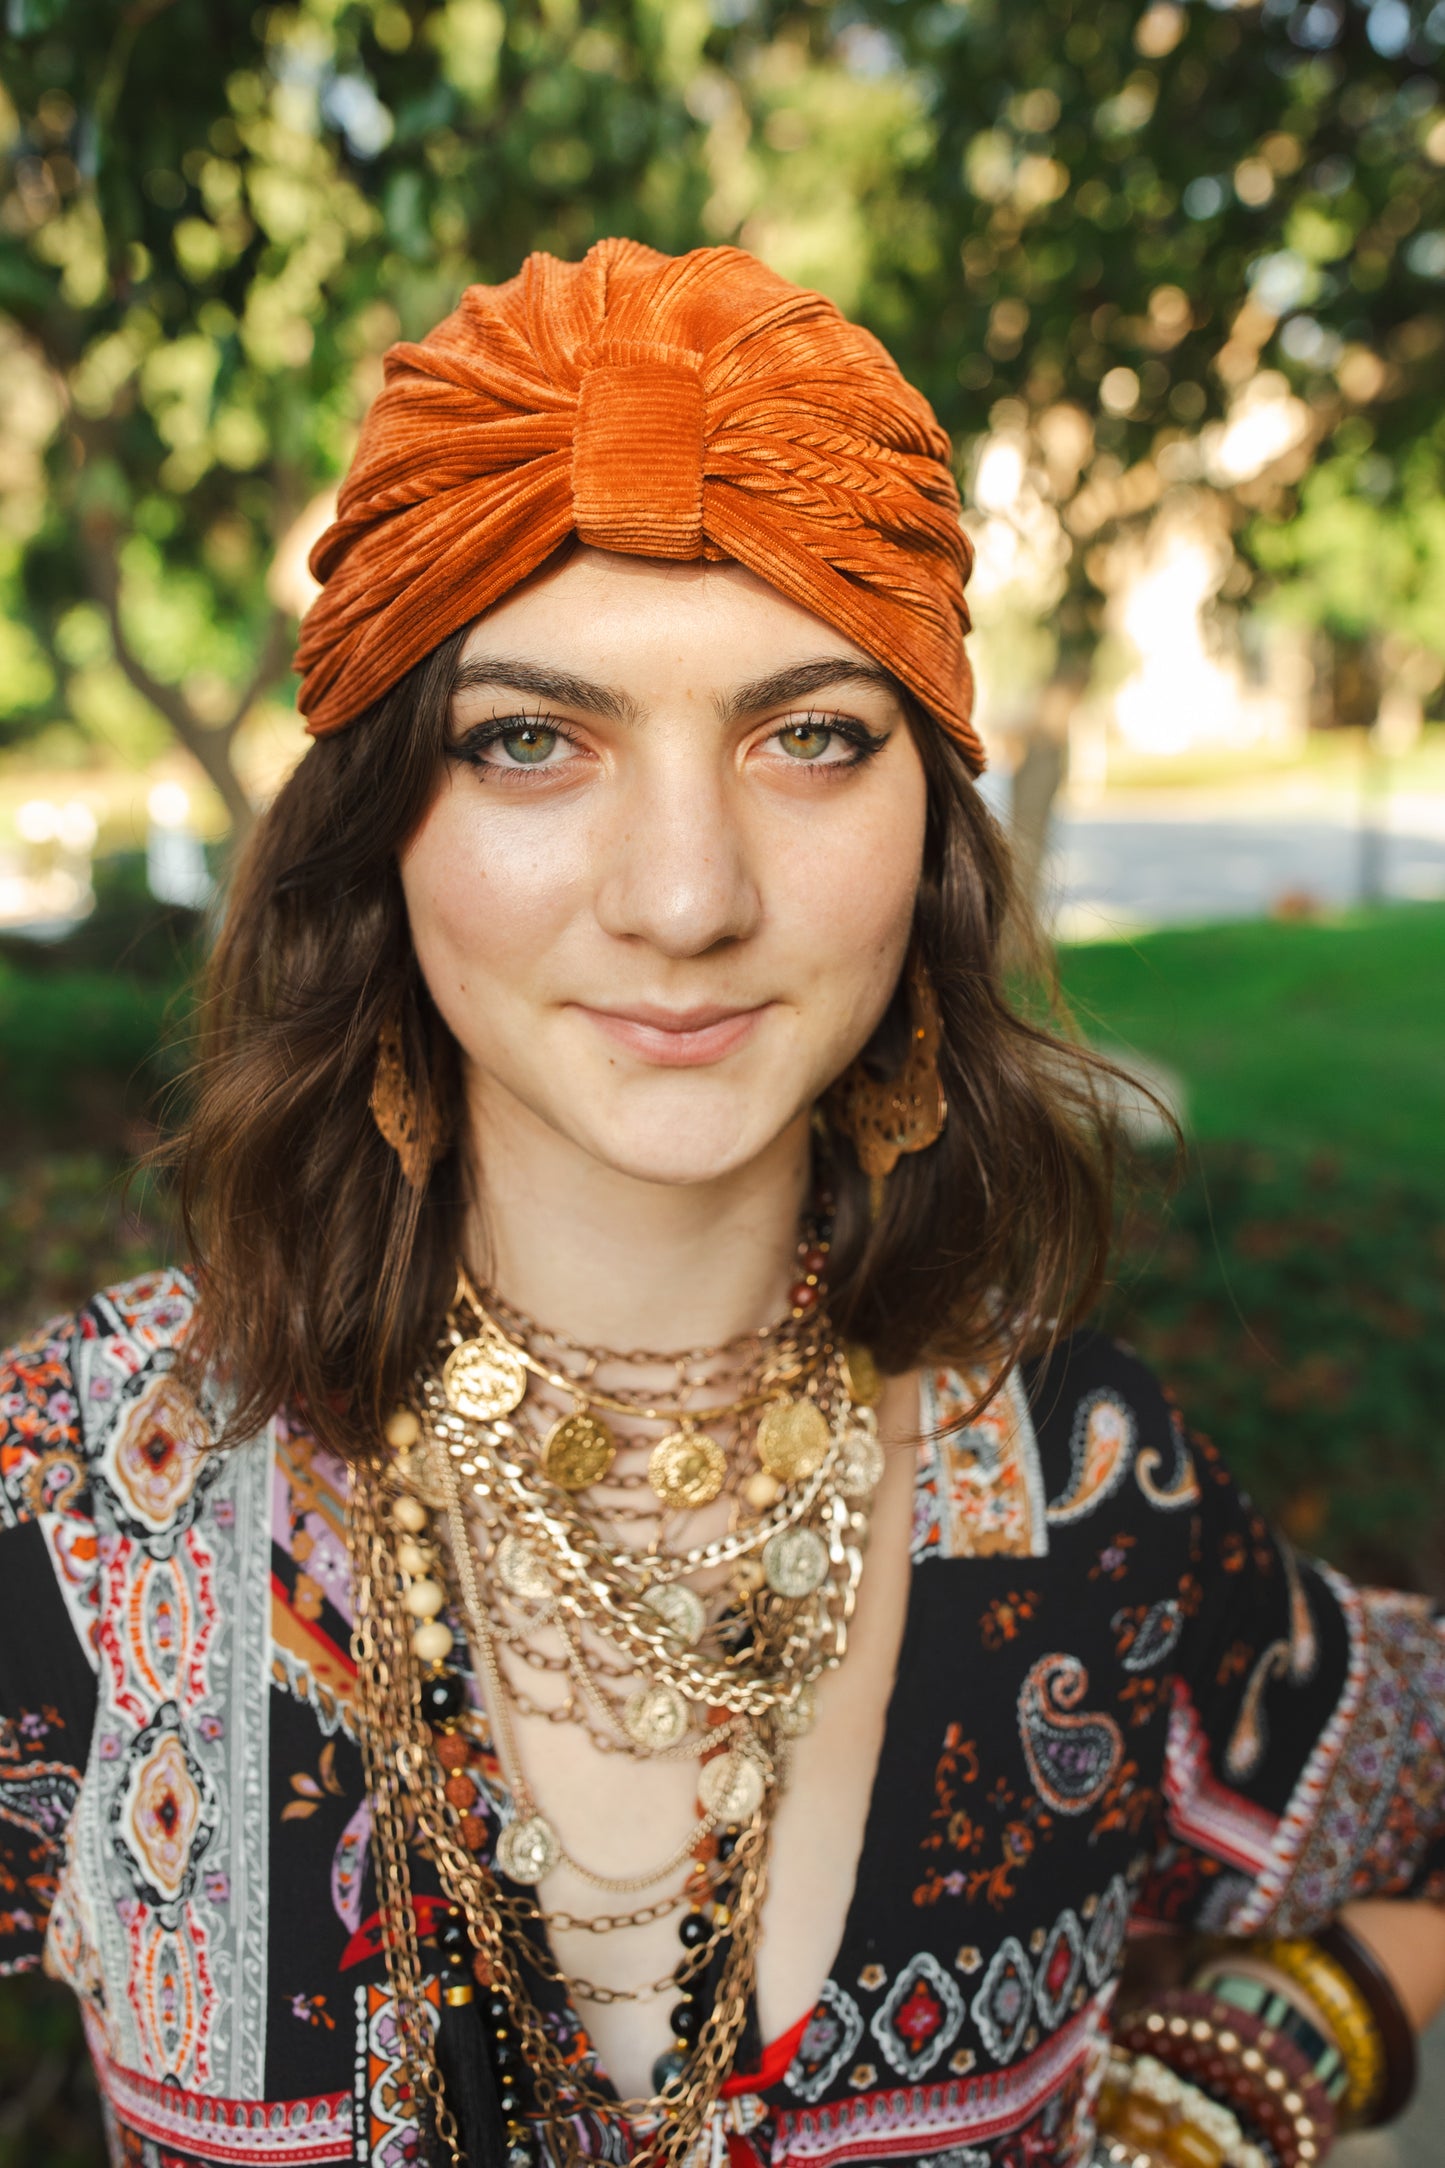 Apricot orange, ribbed stretch velvet fashion turban hat that wears similar to a beanie, with ruching of the fabric that meets front and center at an elegant knot. Vintage-inspired retro 1920s mixed with a modern fabric.